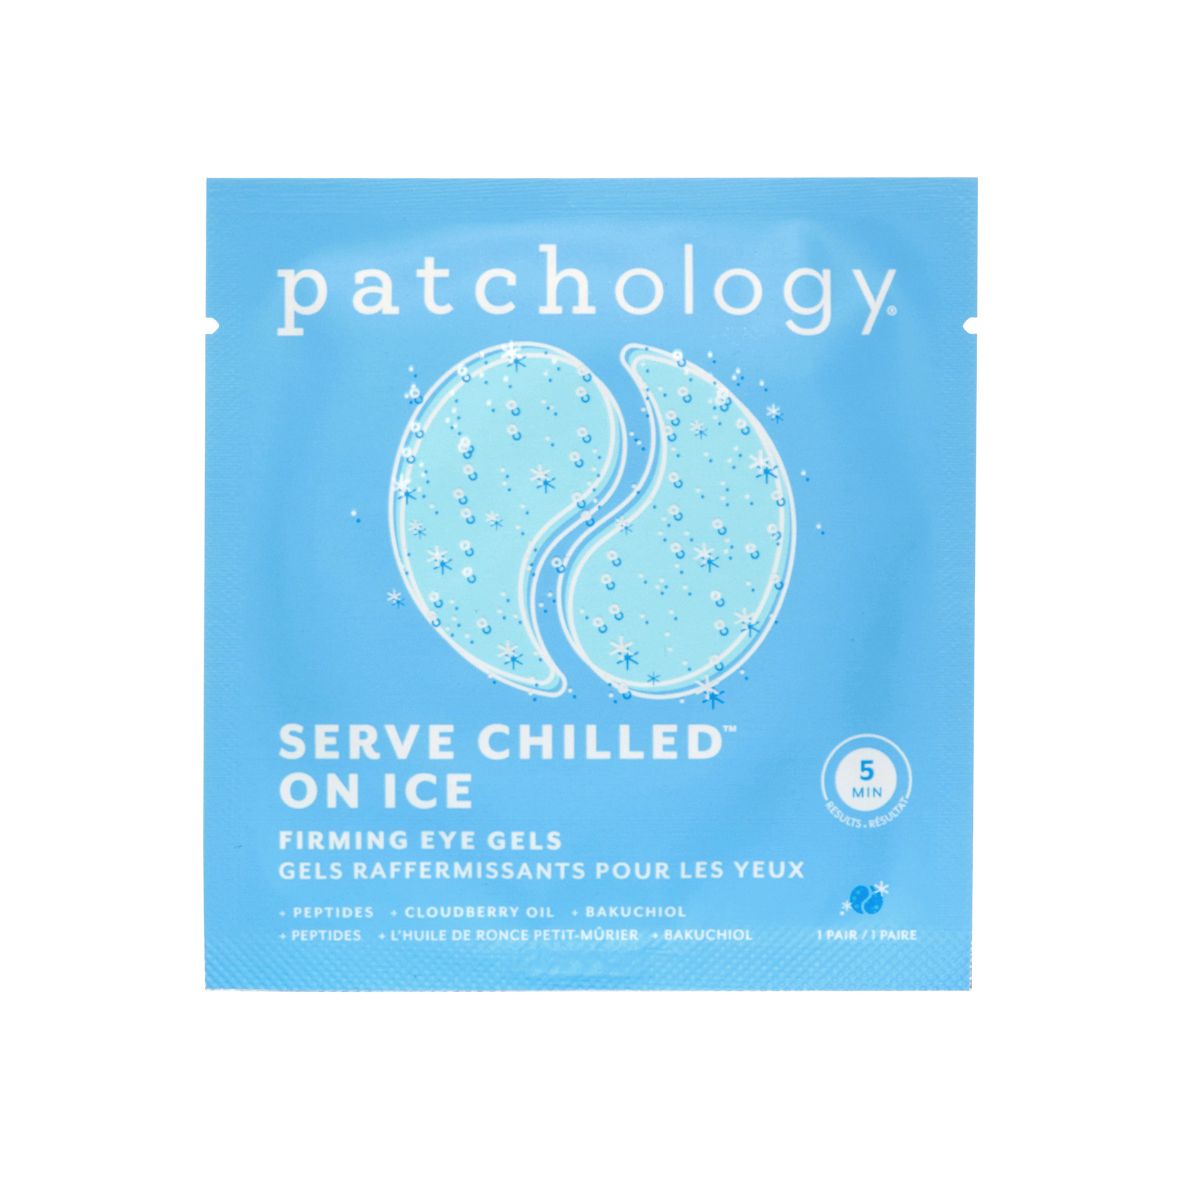 Patchology Serve Chilled On Ice Firming Eye Gel Mask